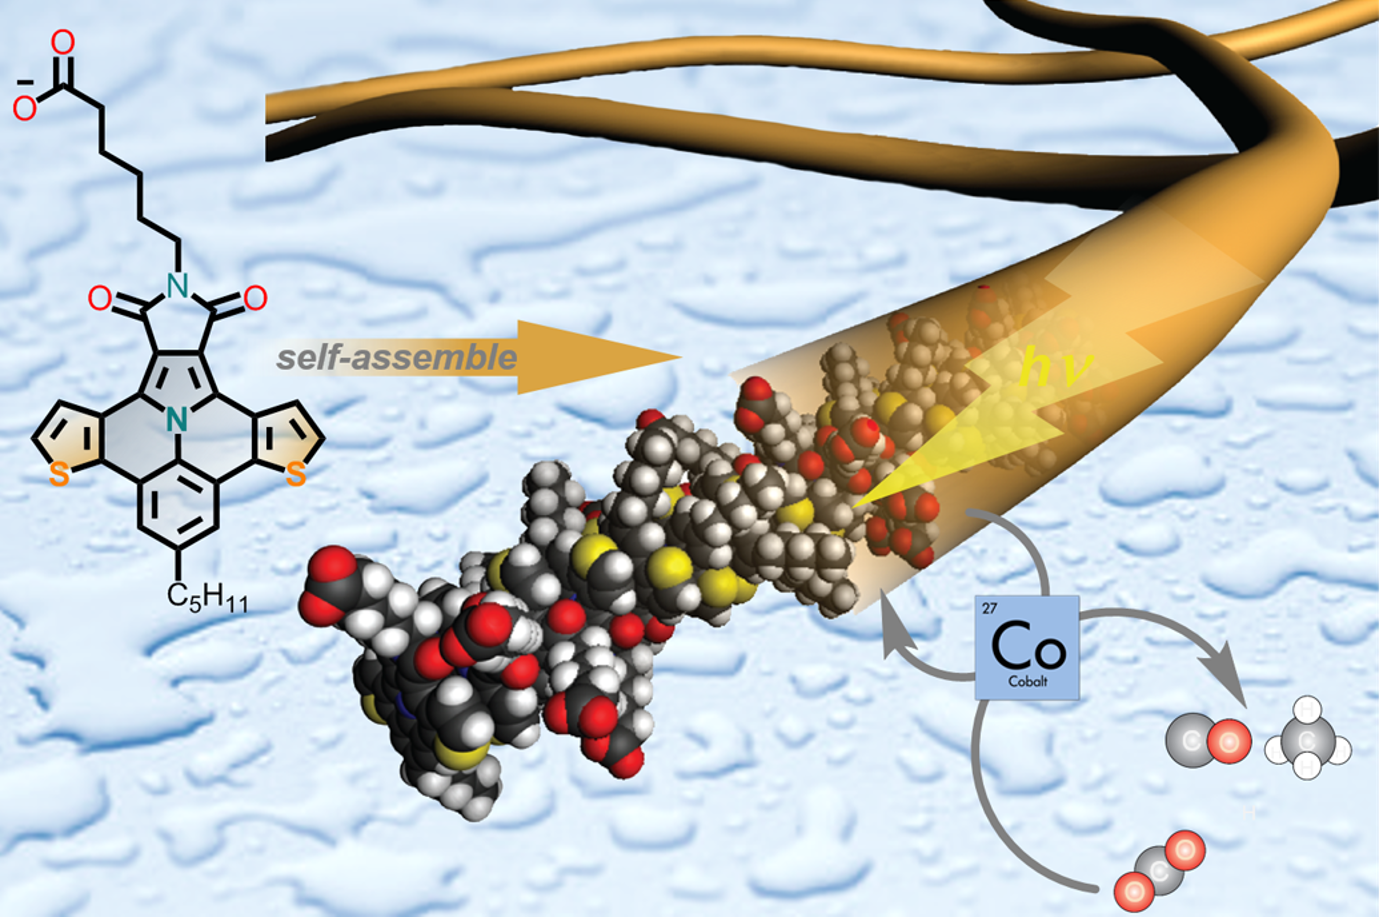 Diareno-ullazine molecules undergo self-assembly in water to form fibrous supramolecular polymers. Under visible light, these assemblies sensitize a cobalt molecular catalyst and convert CO2 to CO and CH4. 